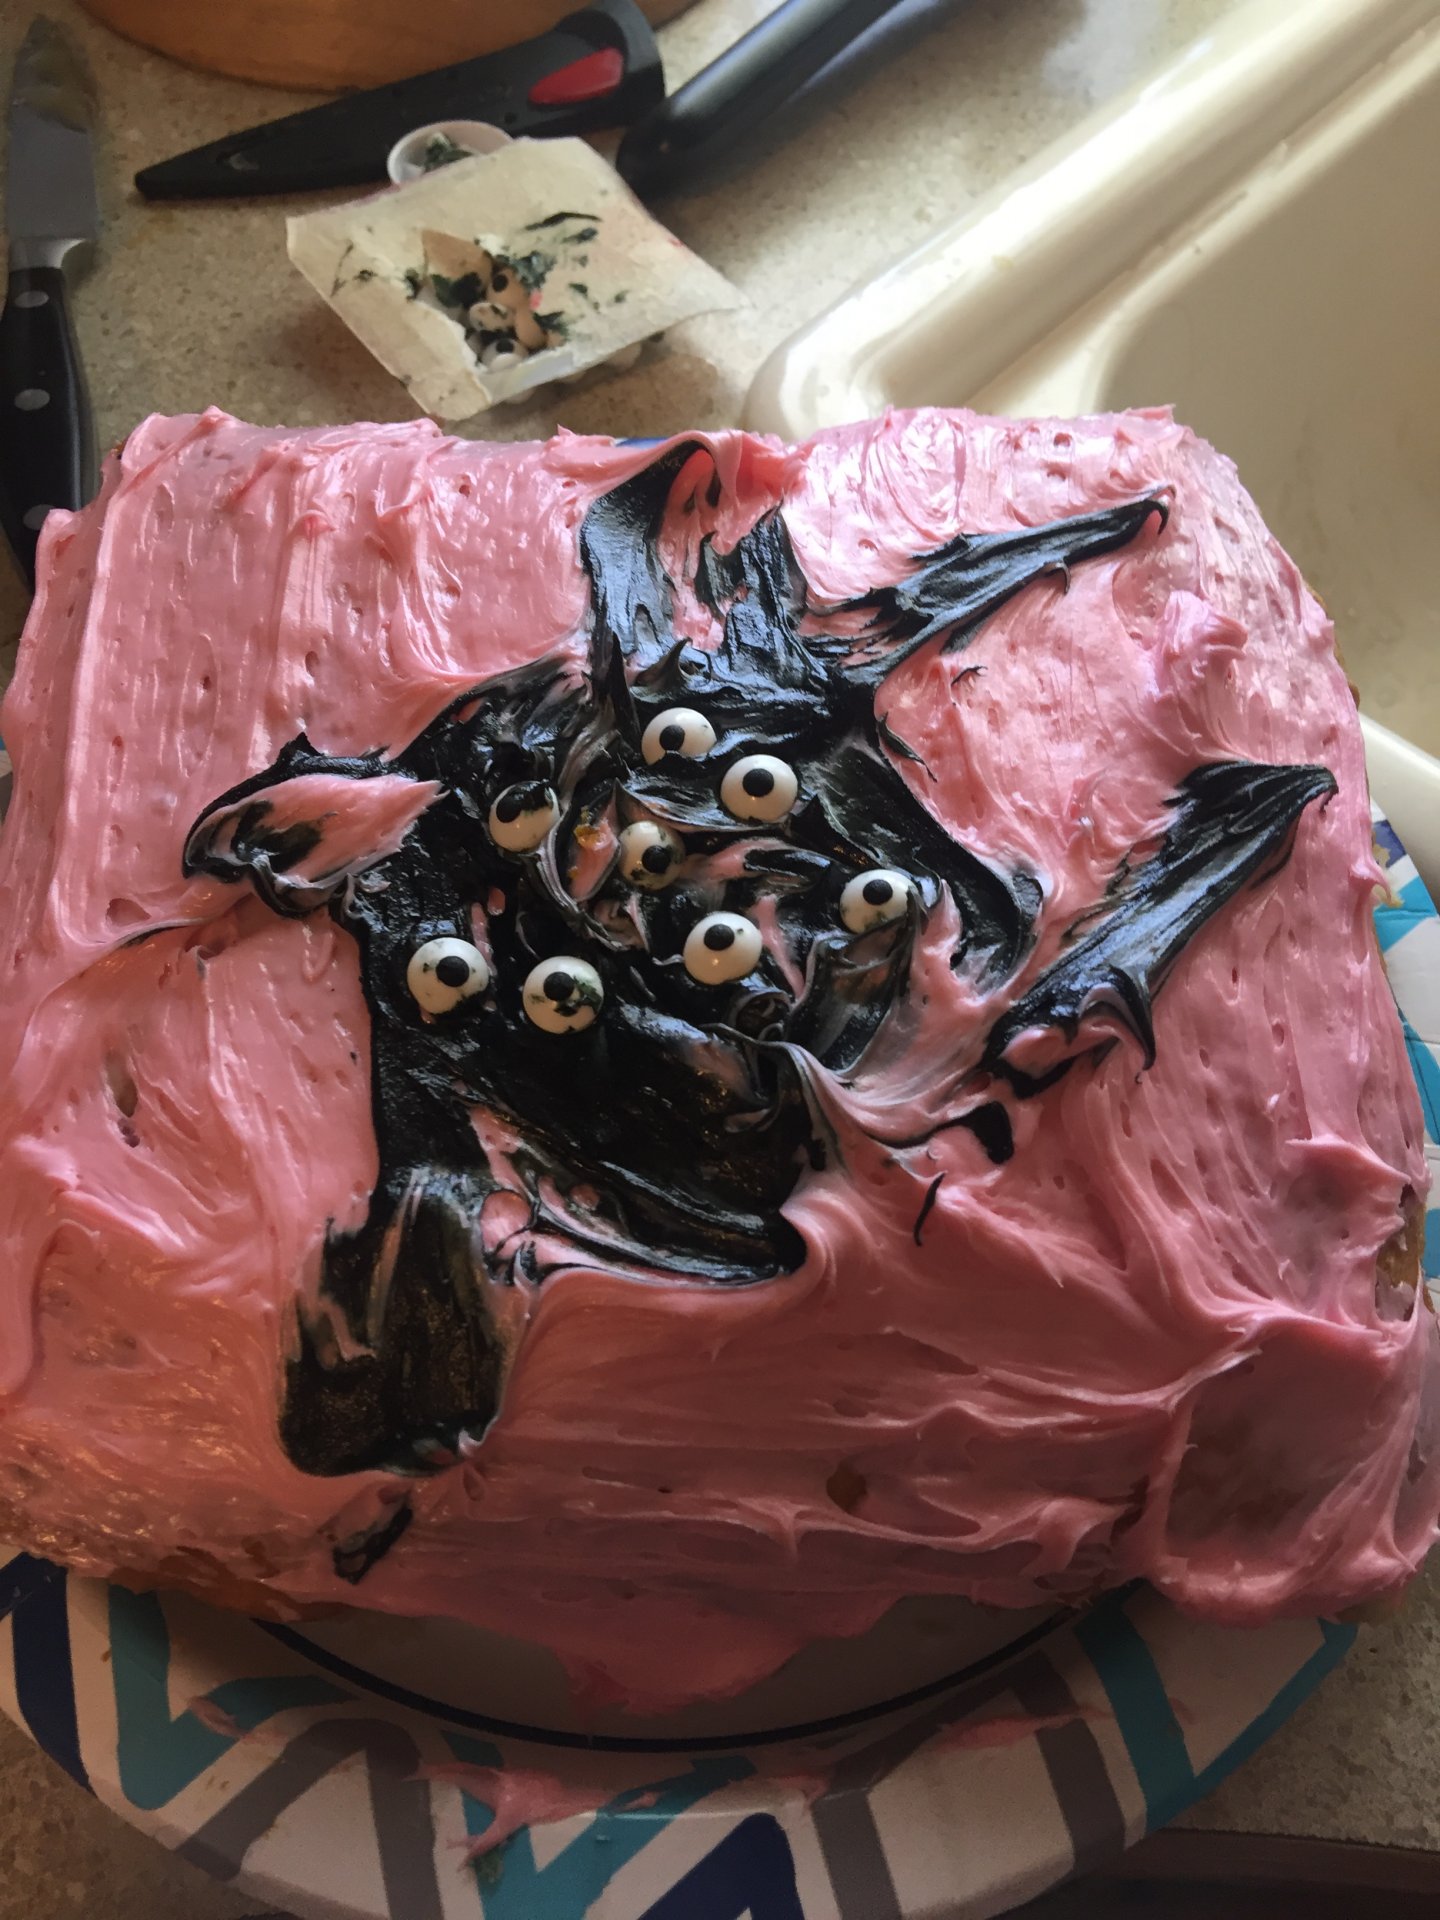 Son made me Cake for my birthday - Hermeous Mora